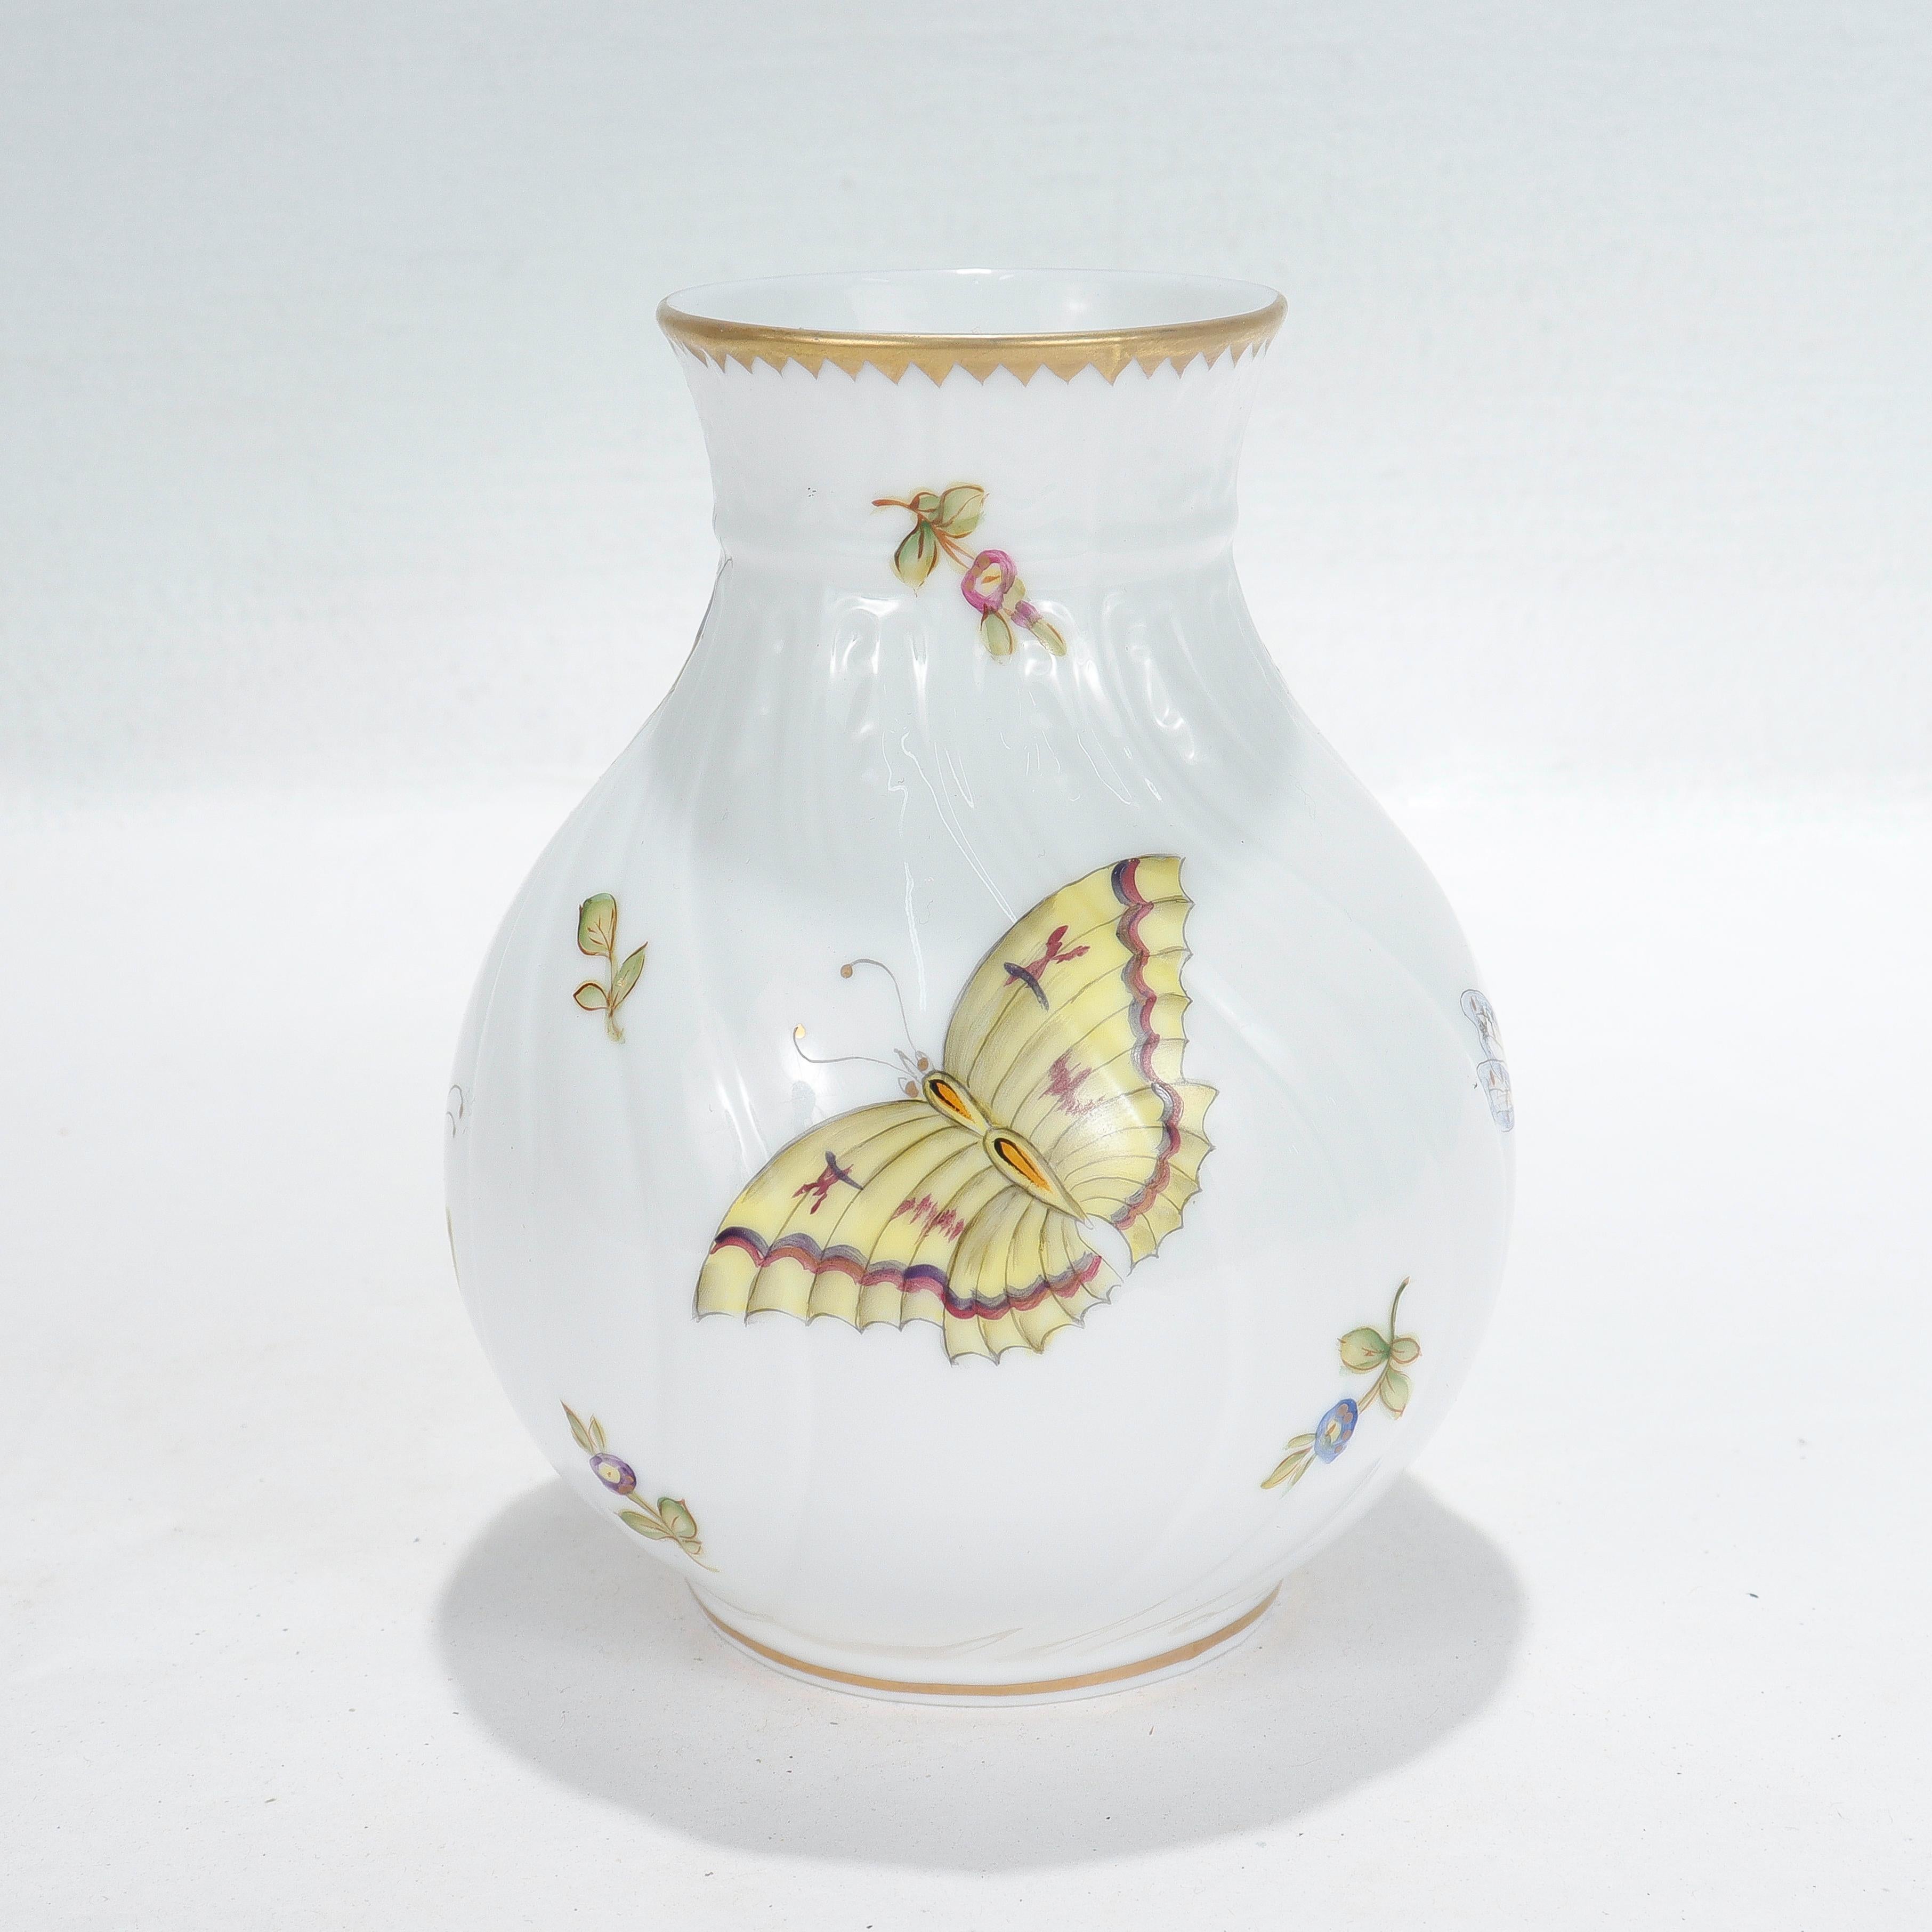 A fine porcelain vase.

By Anna Weatherly.

In the Budapest Spring pattern.

Model no. BL.23

Decorated with butterflies, insects, & flowers in the Herend style.

Simply a wonderful Hungarian porcelain vase!

Date:
21st Century

Overall